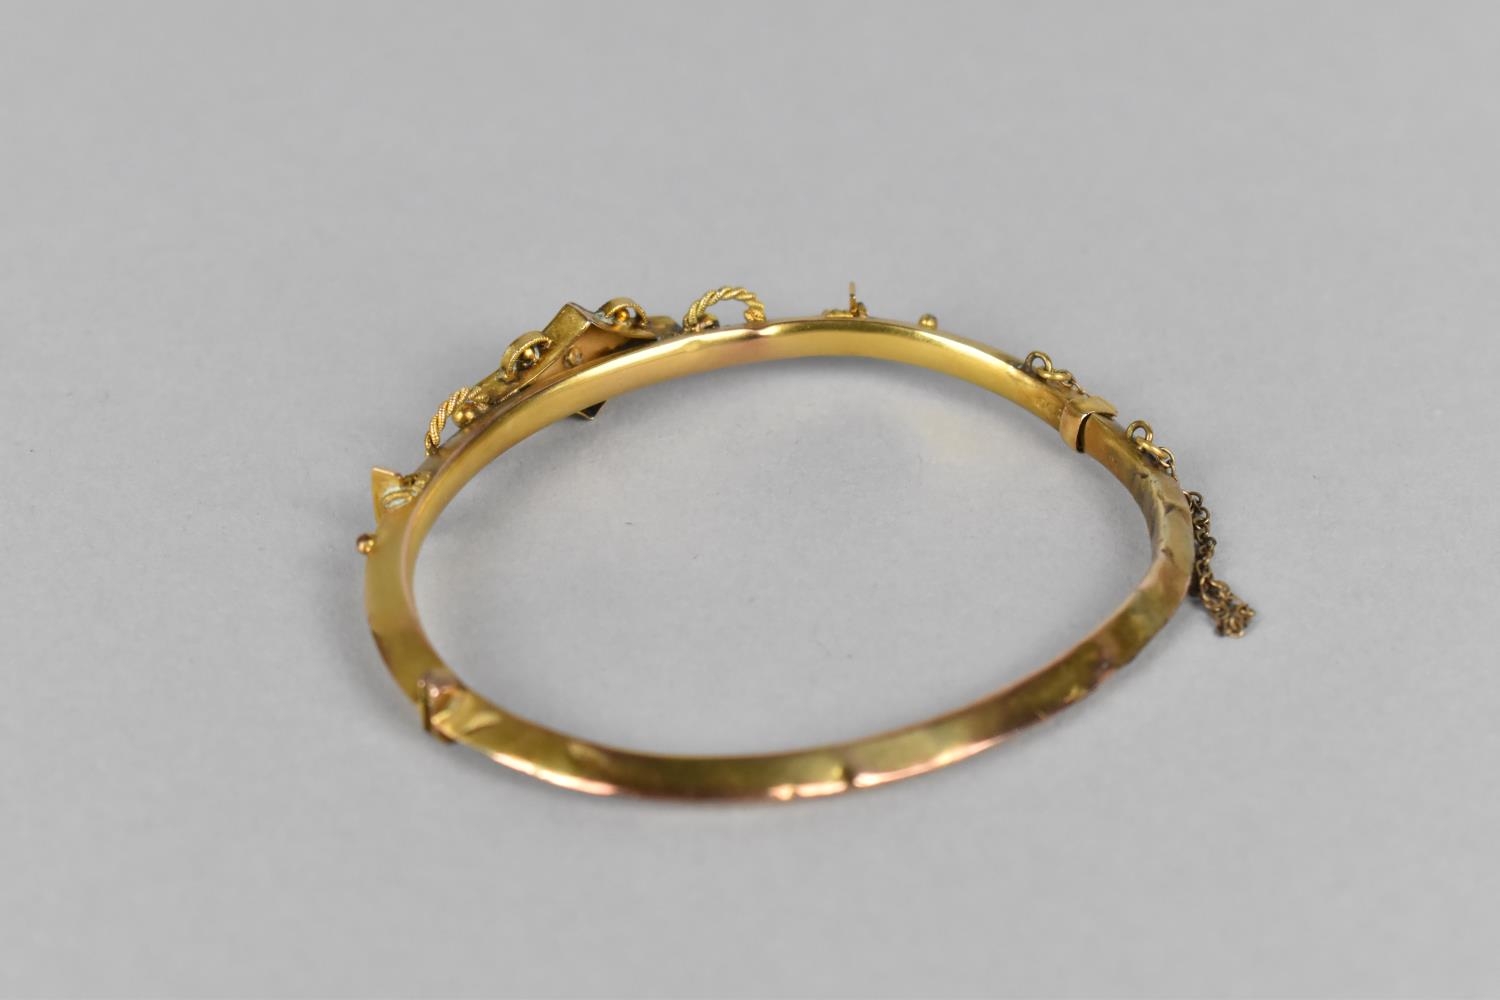 A Late 19th/Early 20th Century 9ct Gold Bracelet with Applied Design and Central Mounted Diamond, 6g - Bild 3 aus 3